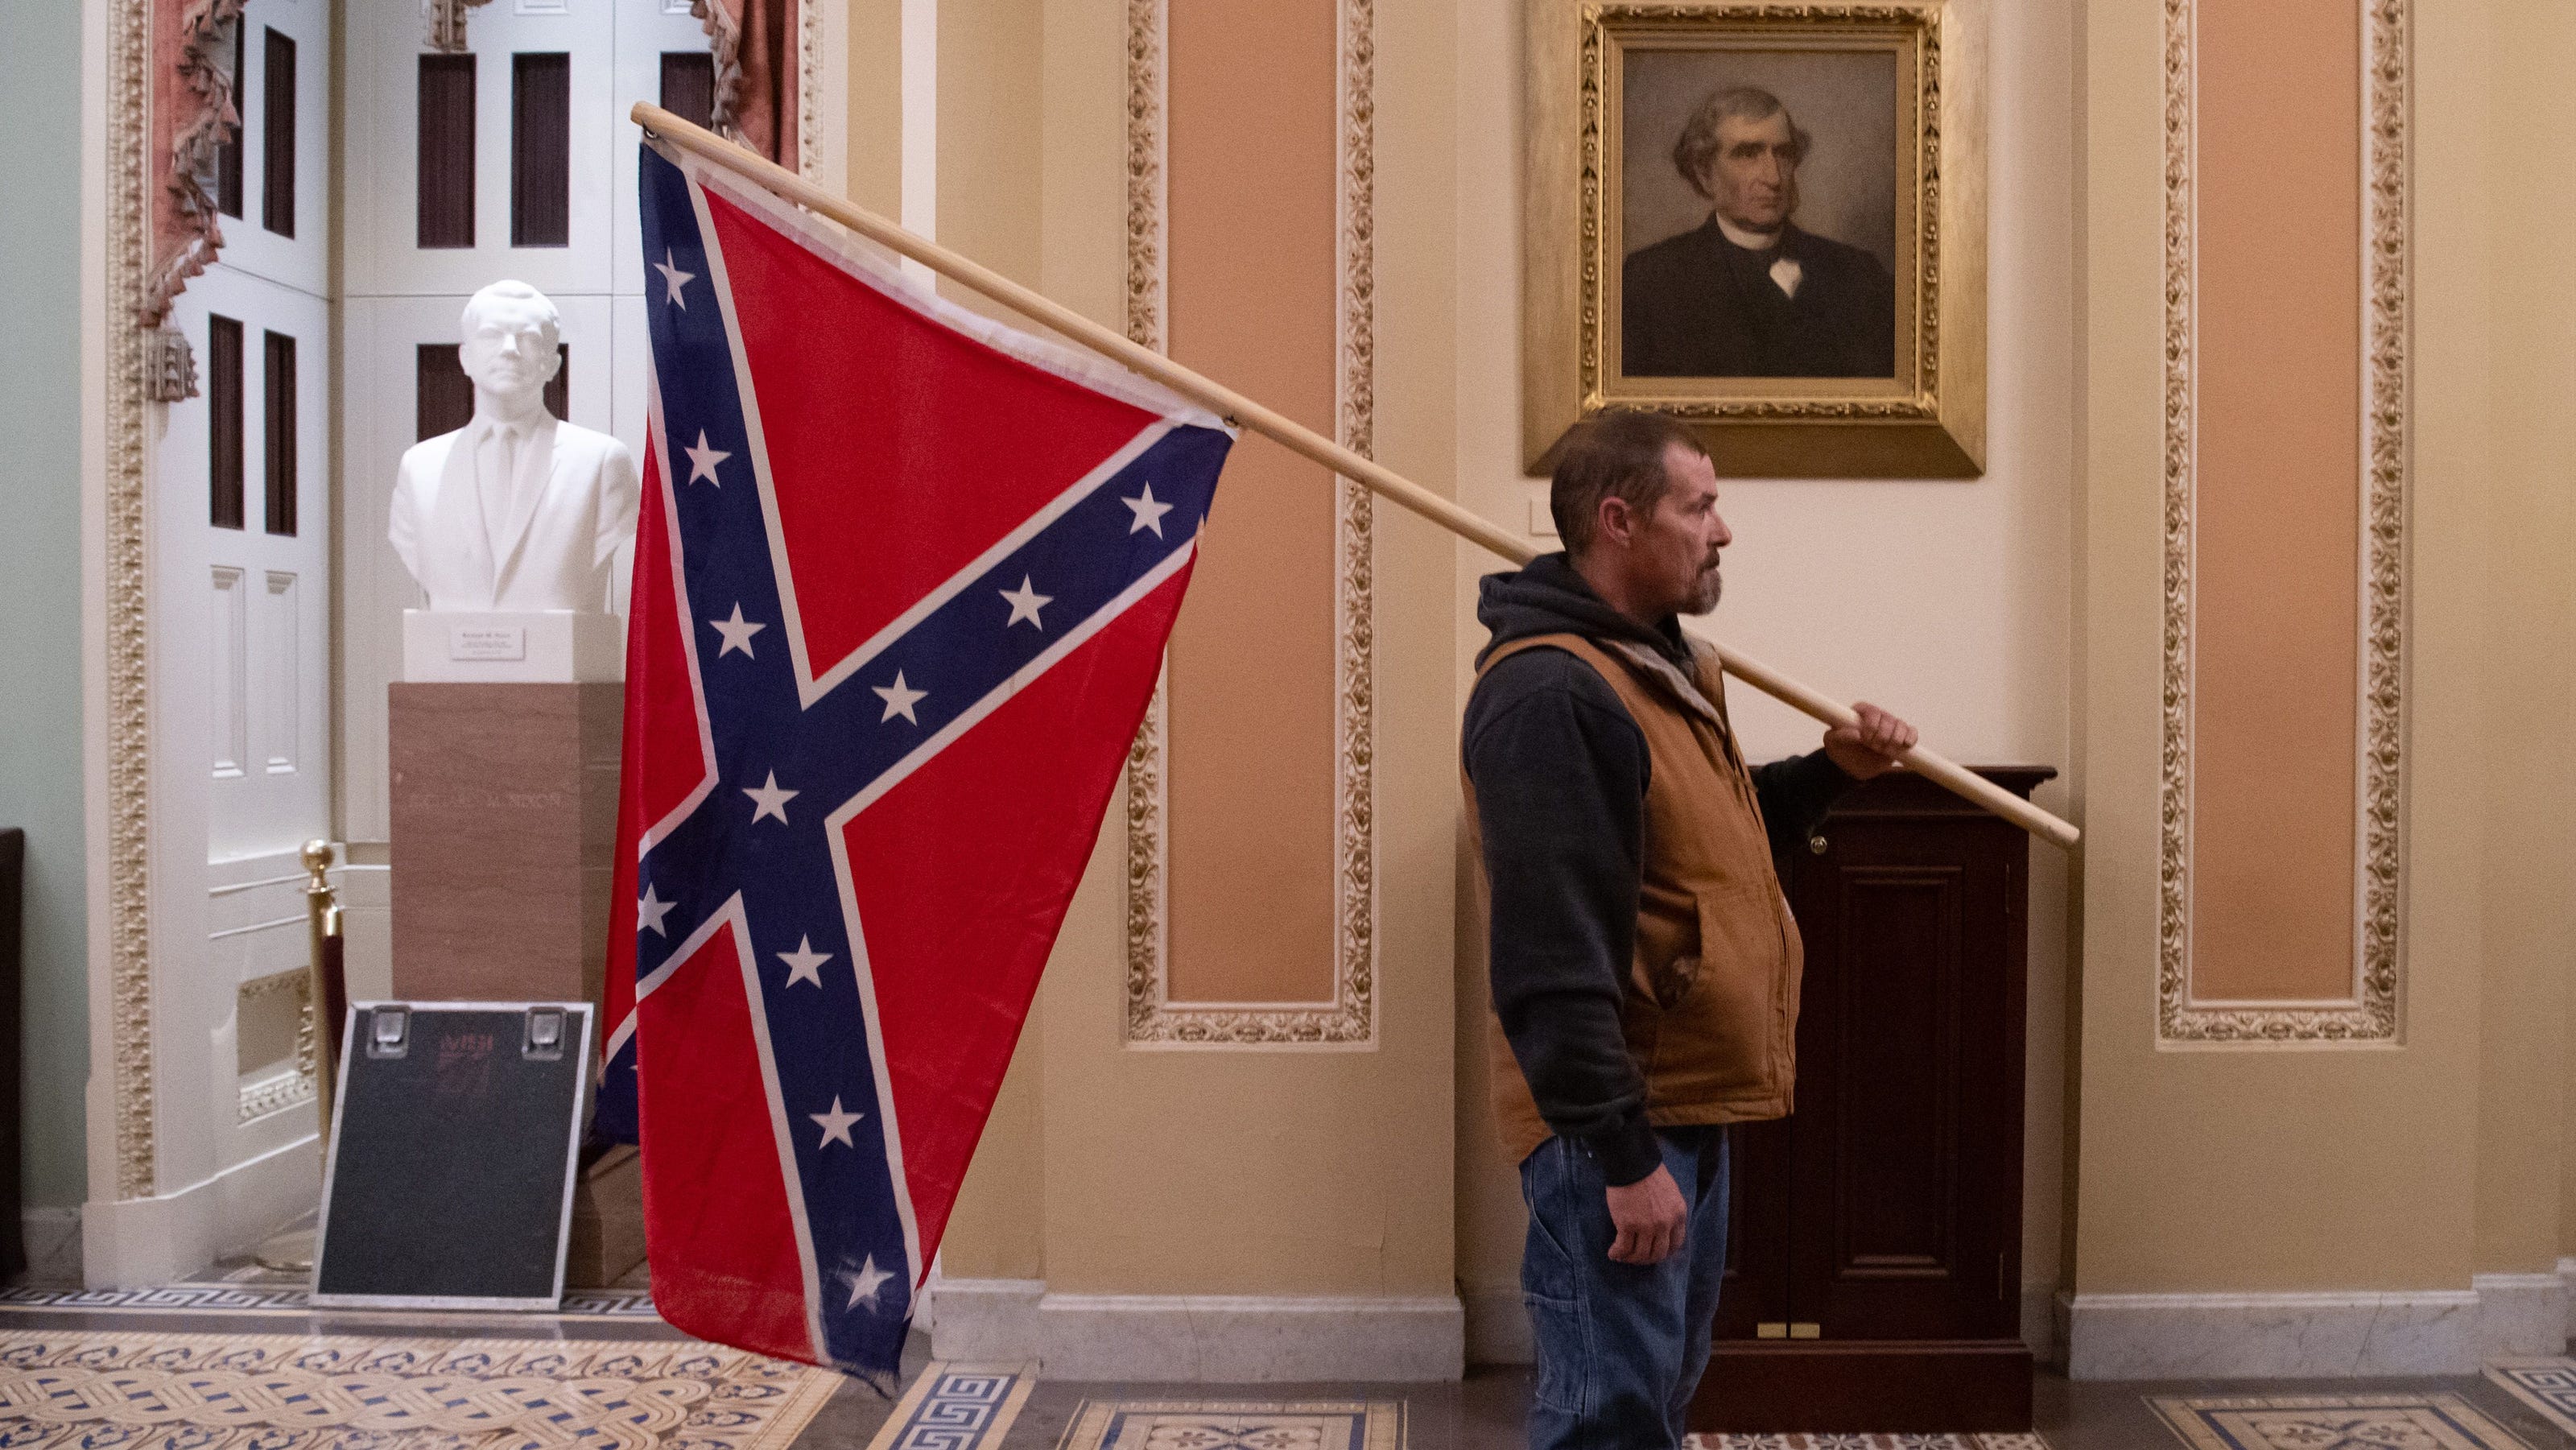 man-seen-carrying-confederate-flag-in-capitol-riot-arrested